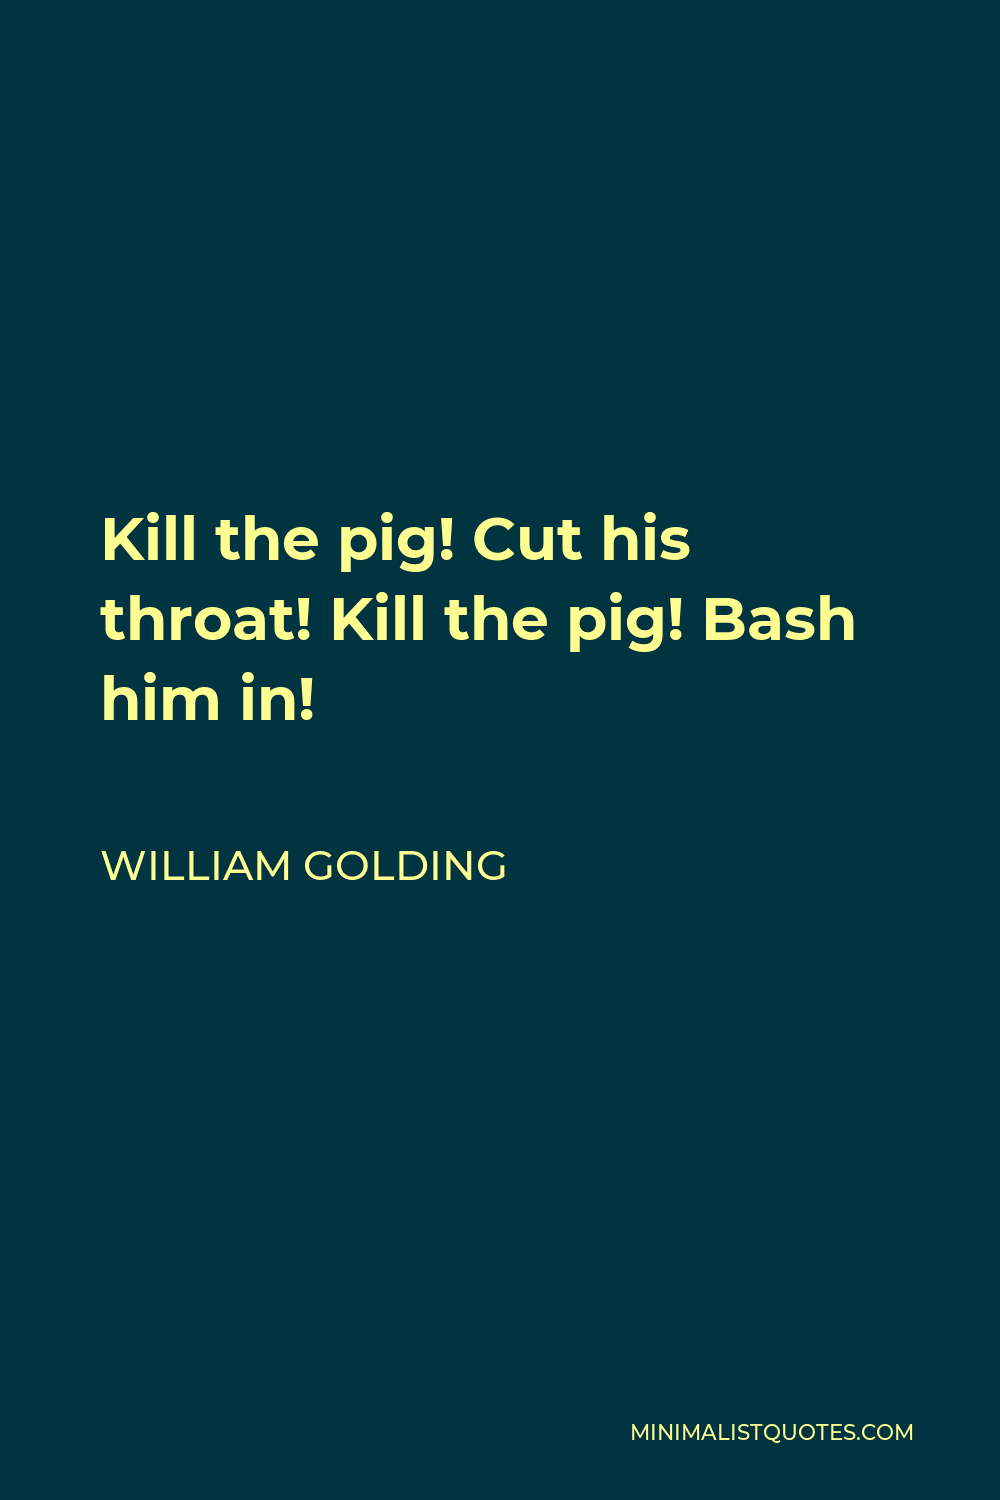 William Golding Quote - Kill the pig! Cut his throat! Kill the pig! Bash him in!